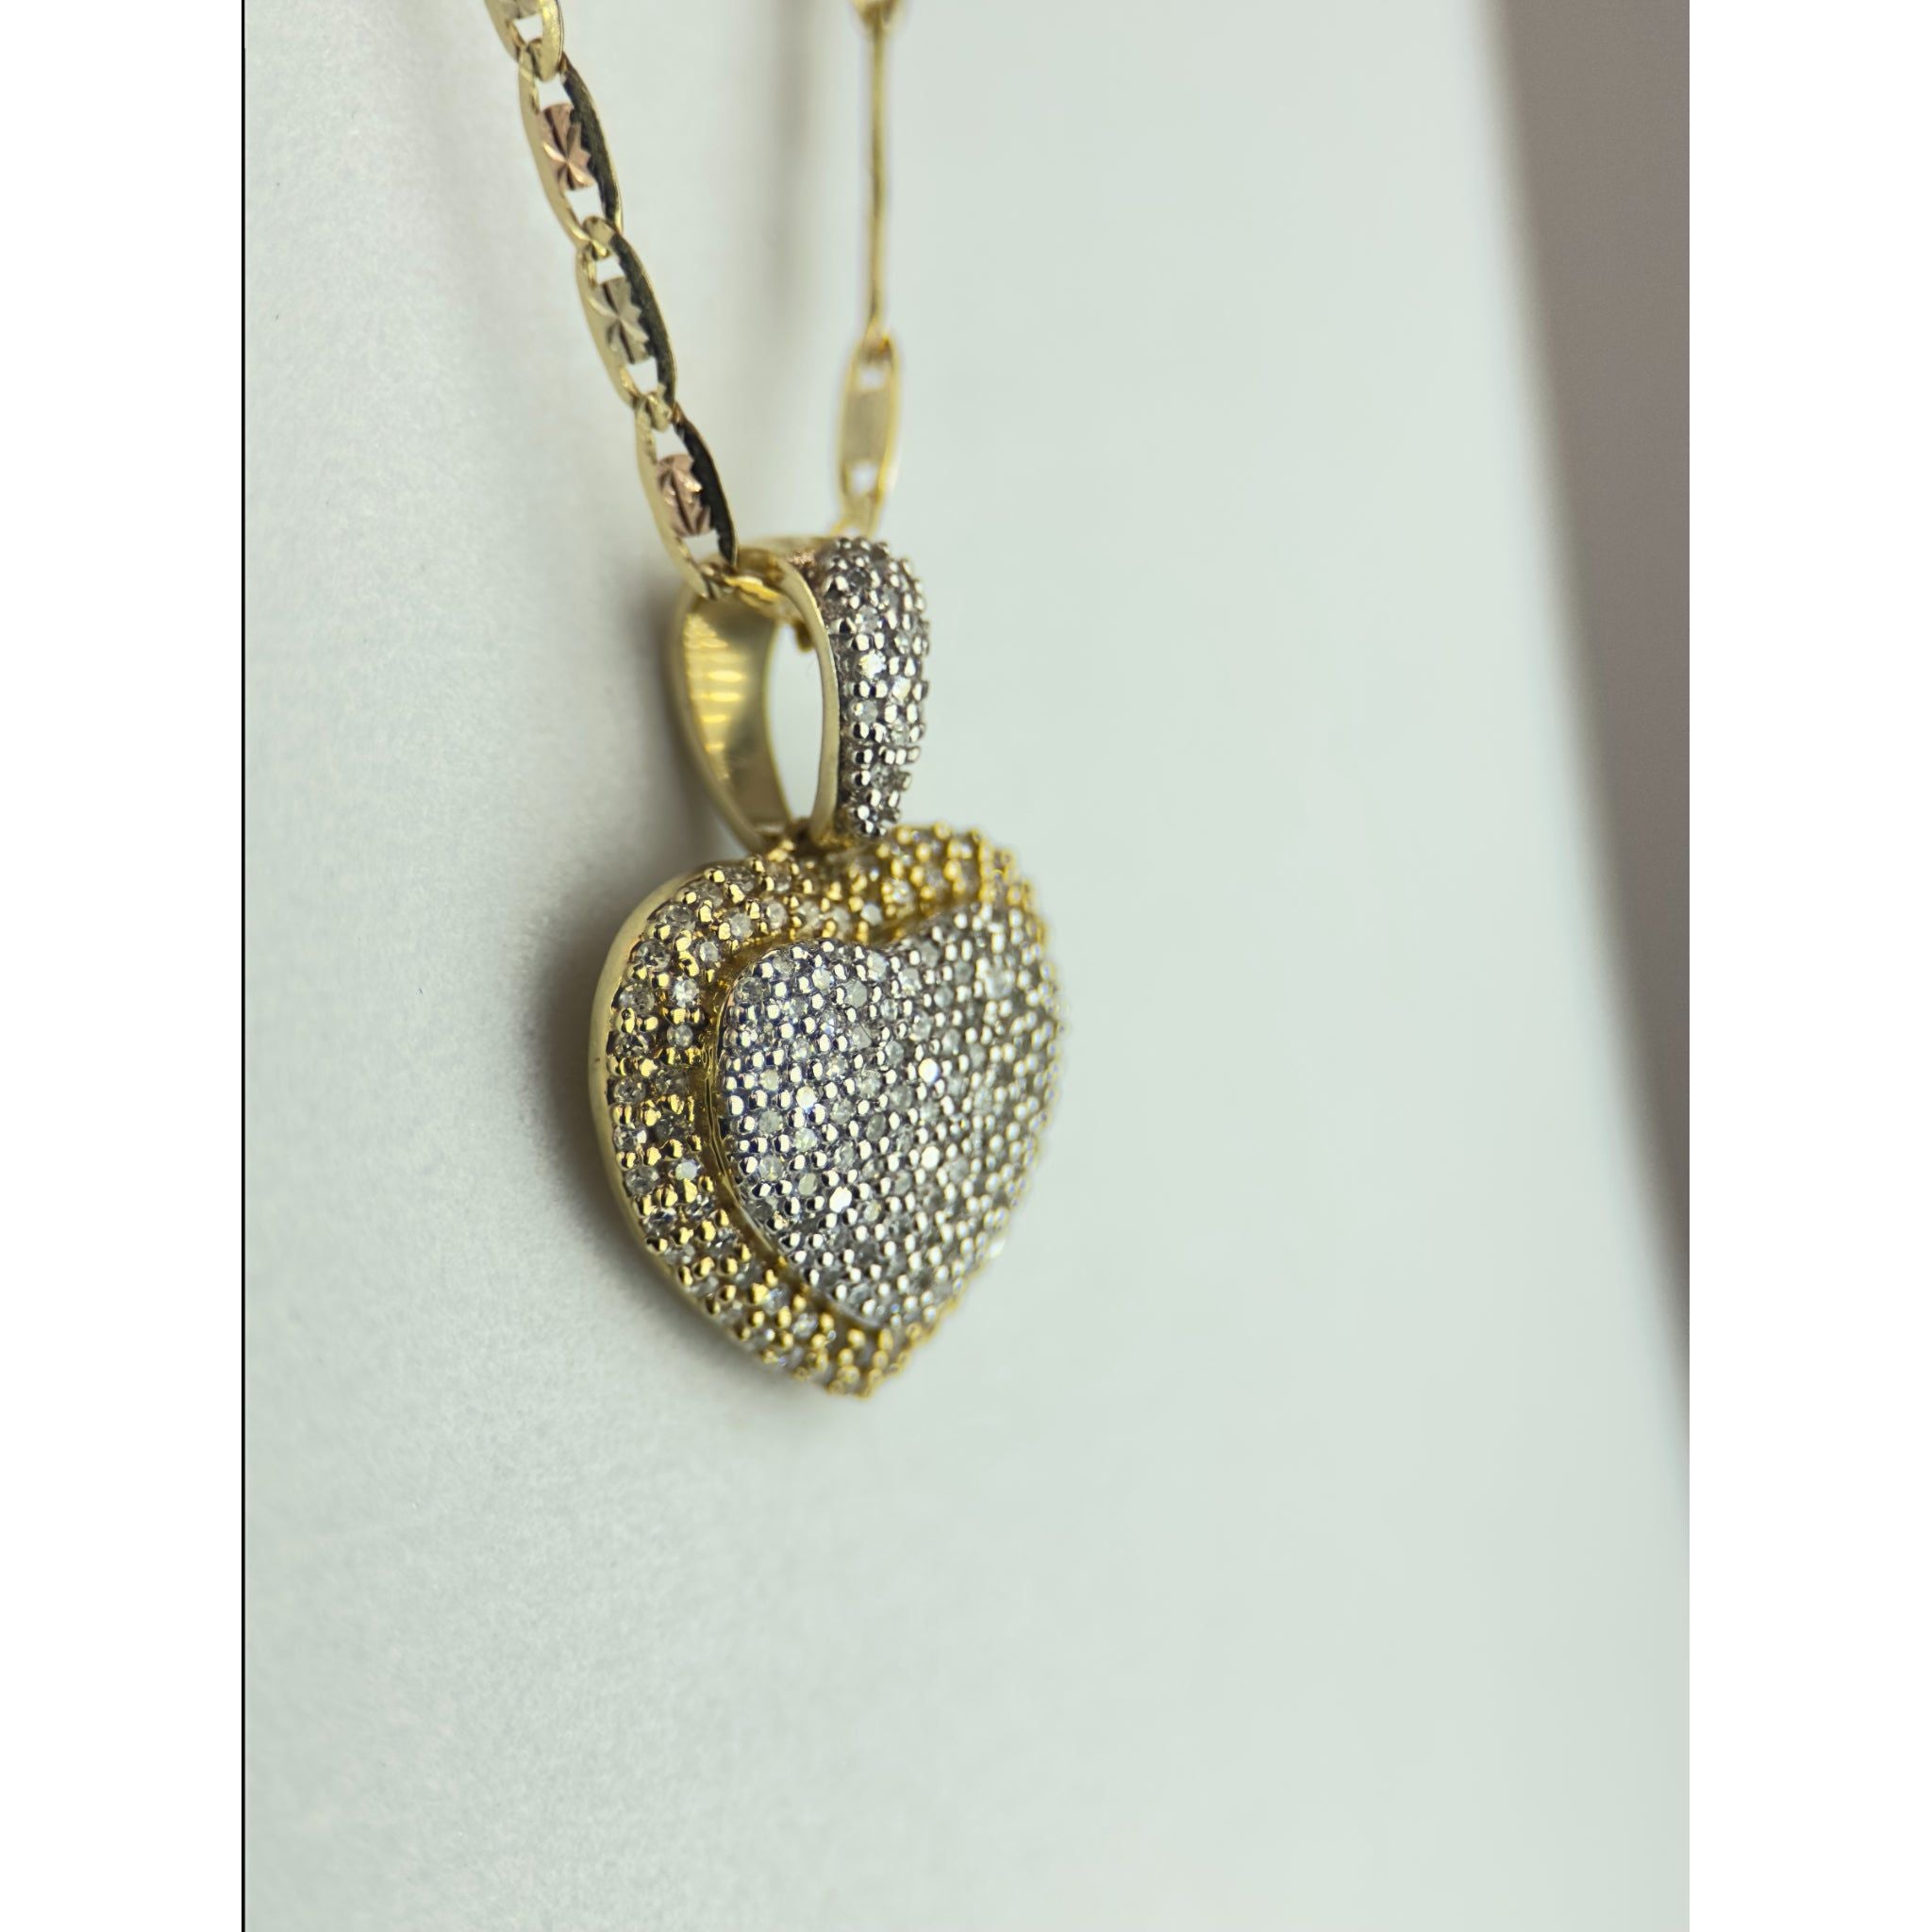 DR2206 - 14K Yellow Gold - Diamond - Pendant and Chain